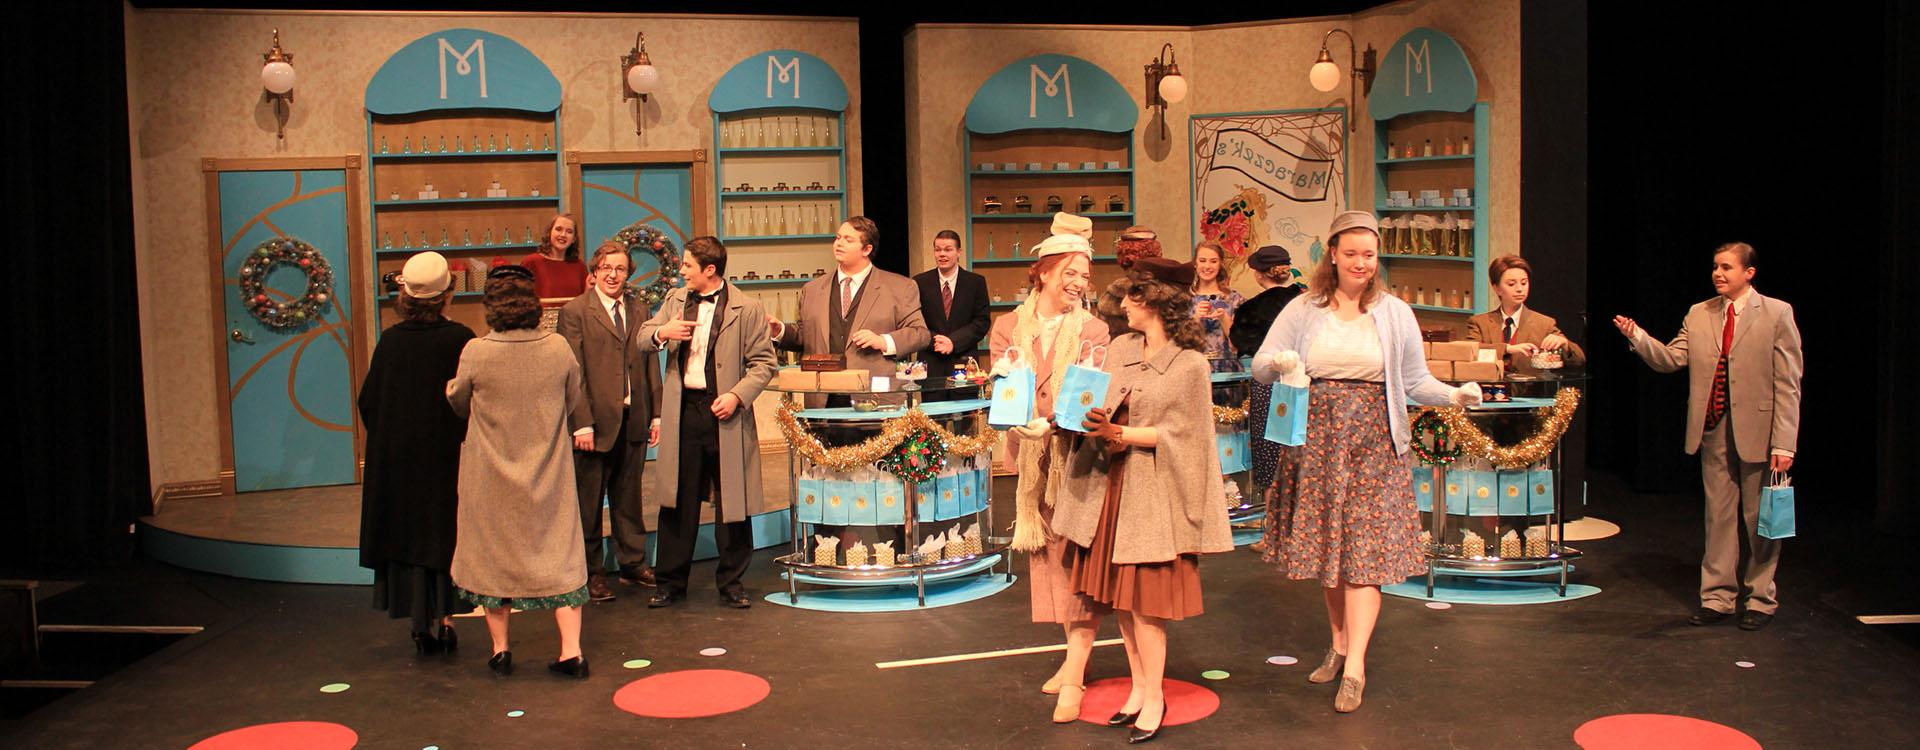 Theatre production photo from She Loves Me